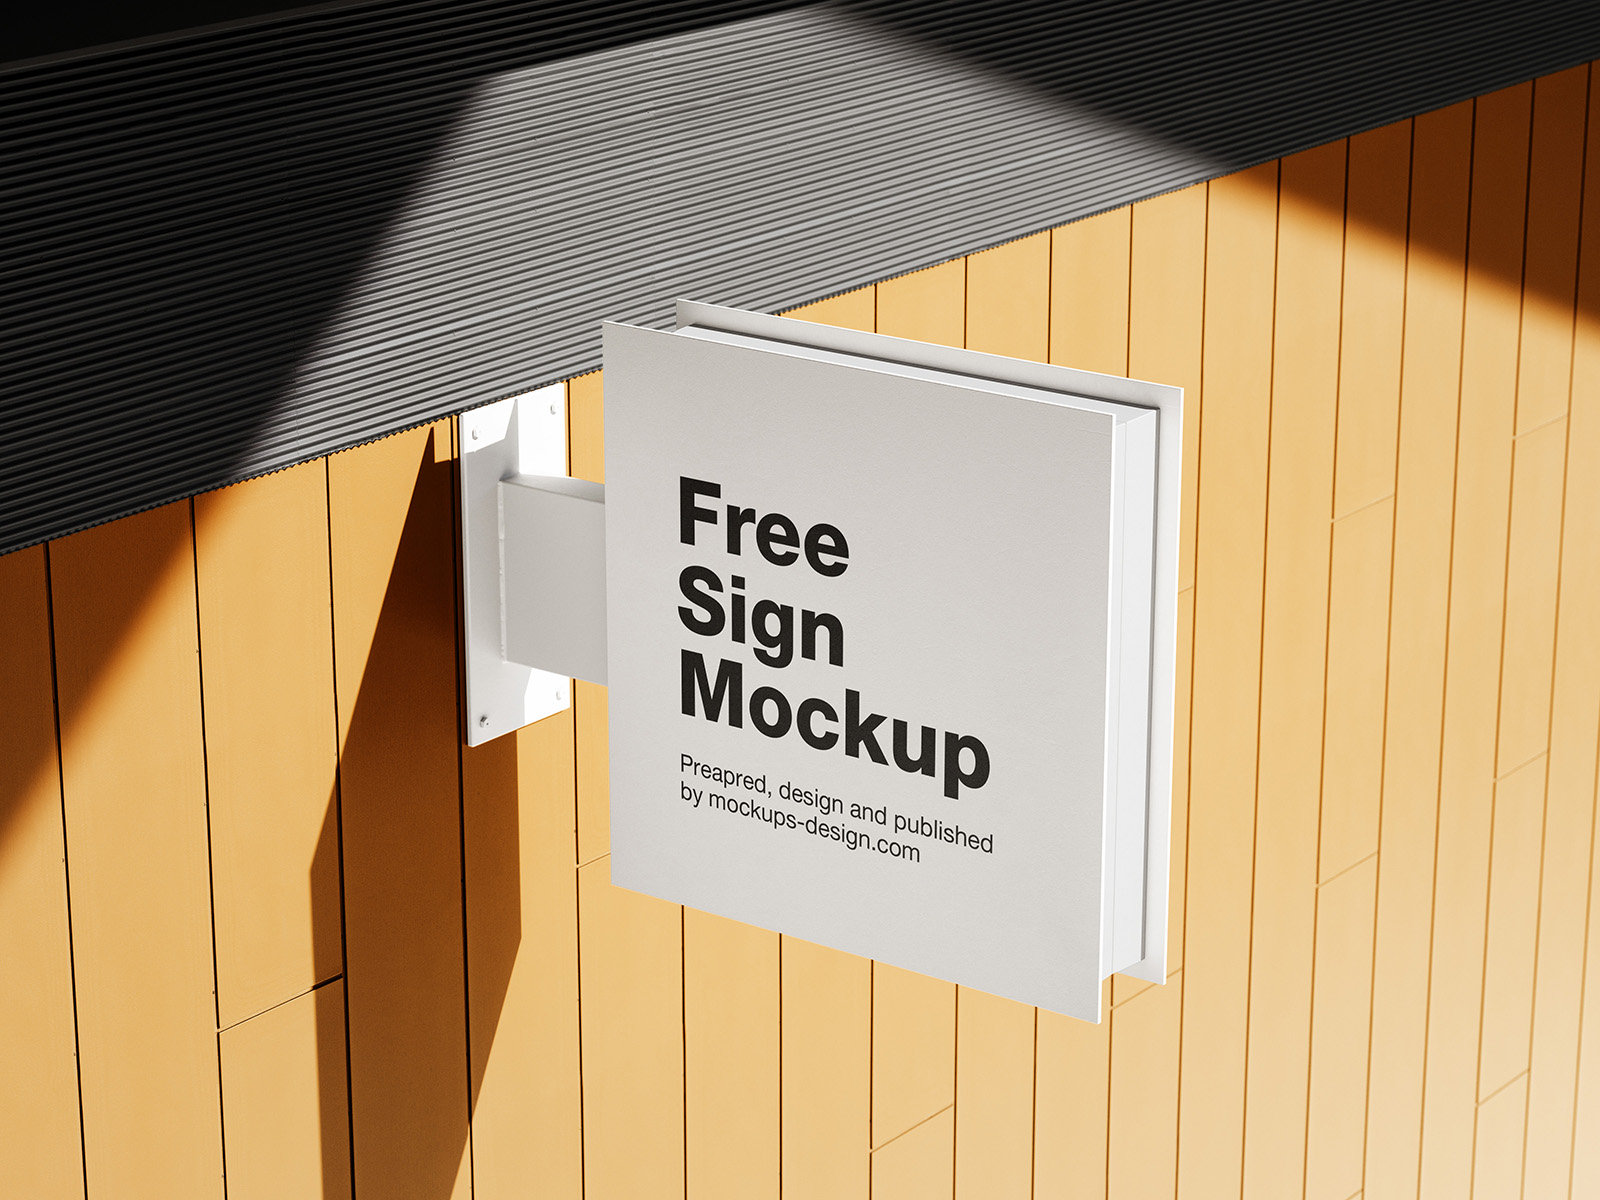 4 Square Metal Sign Mockups in Different Sights FREE PSD